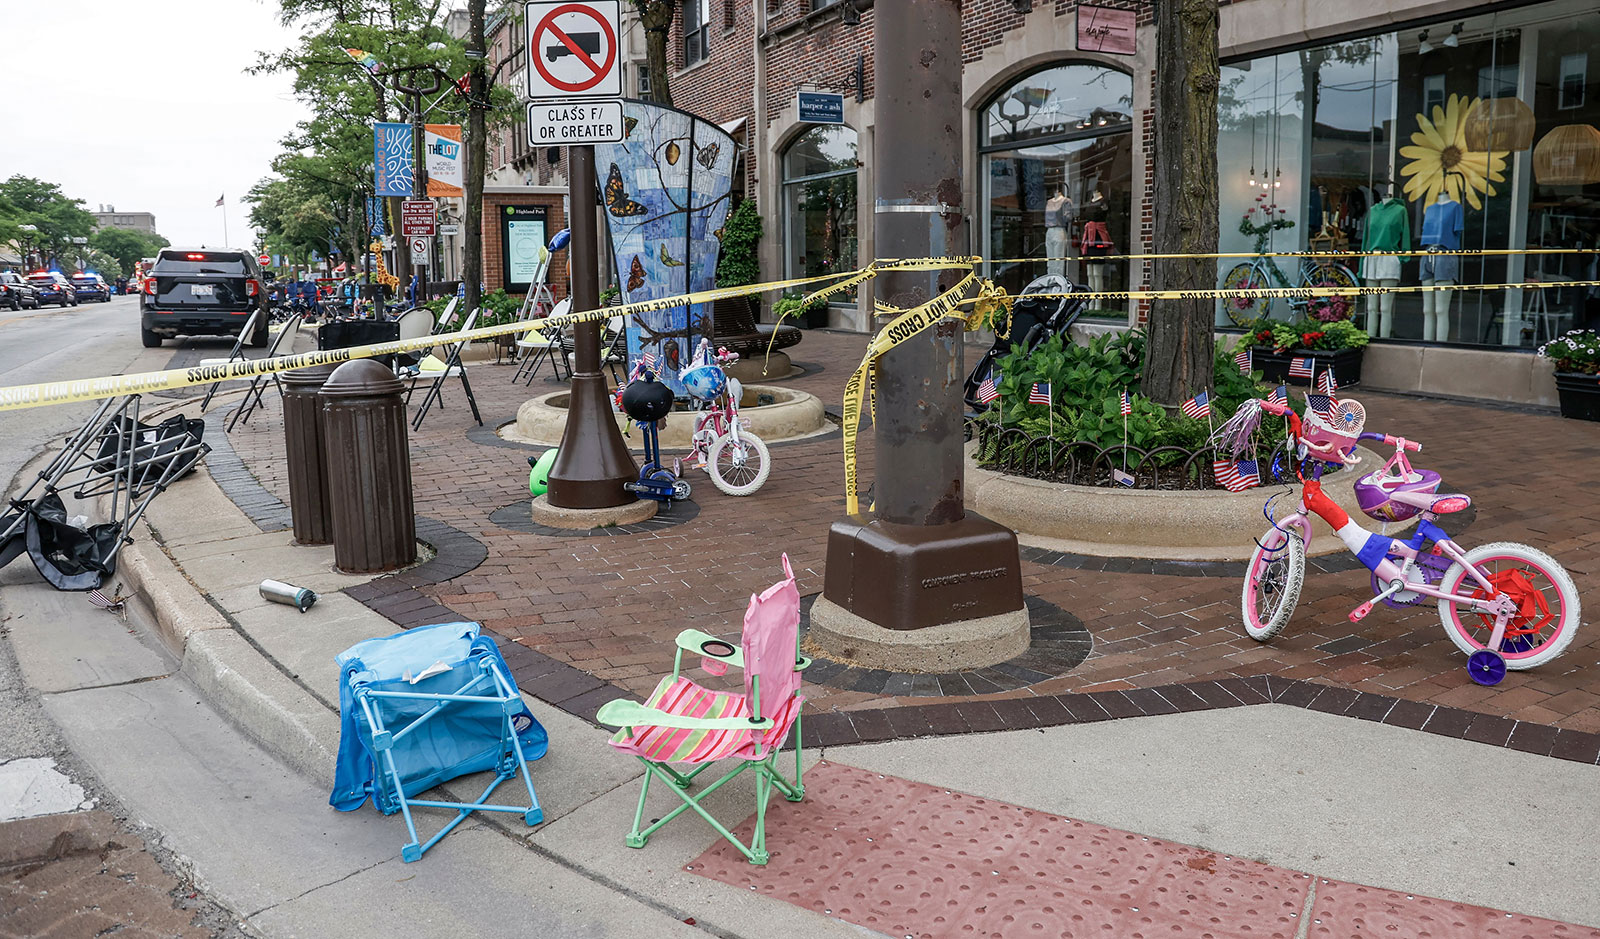 Chairs and bicycles lie abandoned after people fled the scene of a shooting at a July 4th celebration and parade in Highland Park, Illinois on July 4.